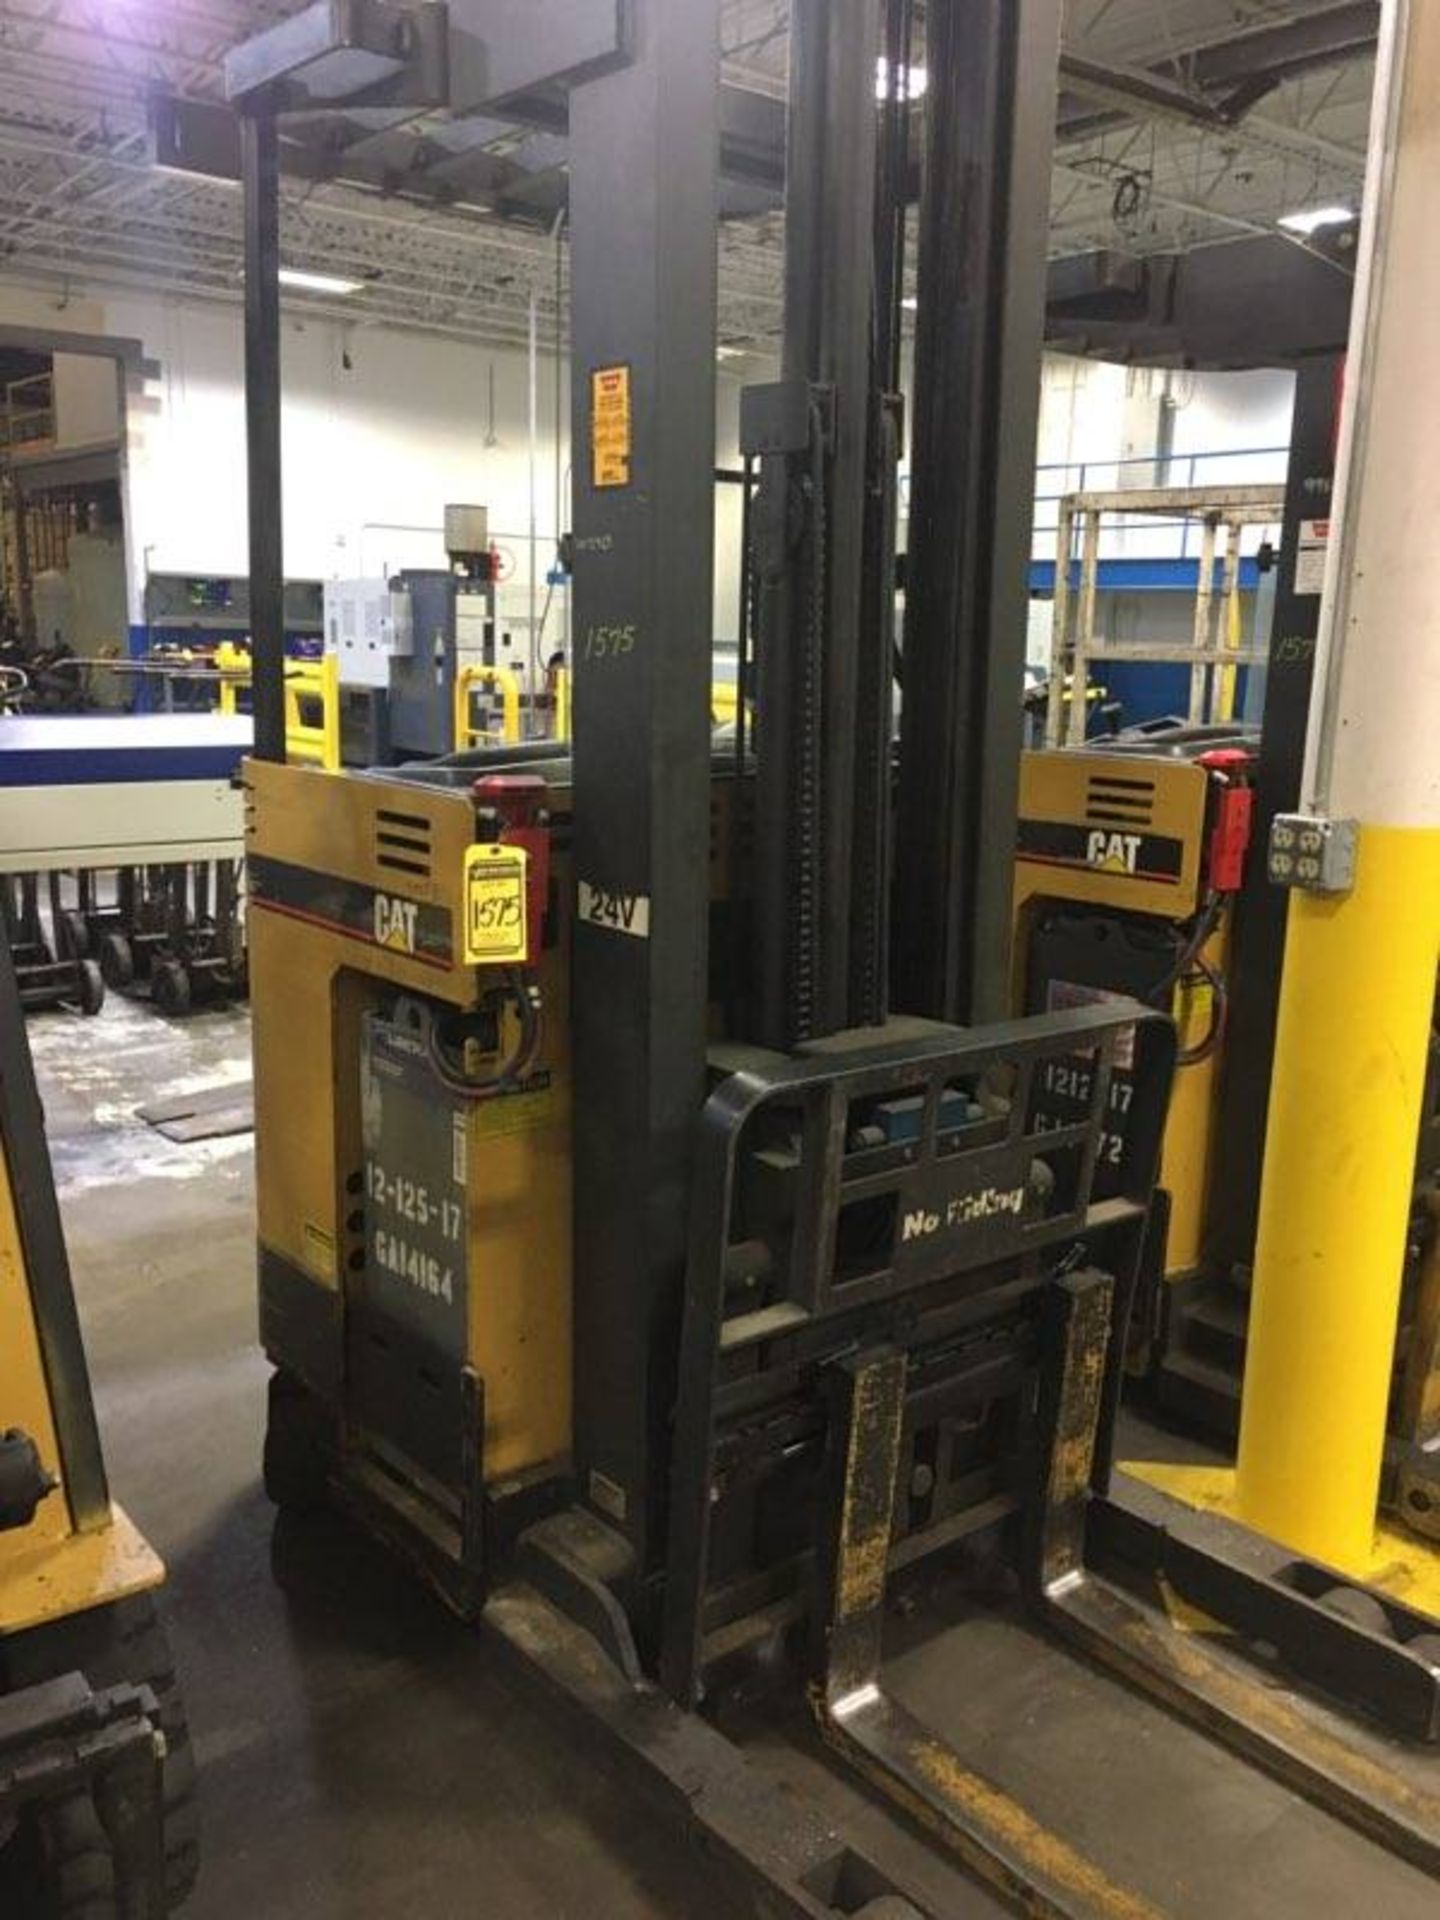 CATERPILLAR 3,000-LB. CAPACITY ELECTRIC FORKLIFT, MODEL EP18KT, 3-STAGE MAST, SIDE SHIFT, 188'' - Image 2 of 2